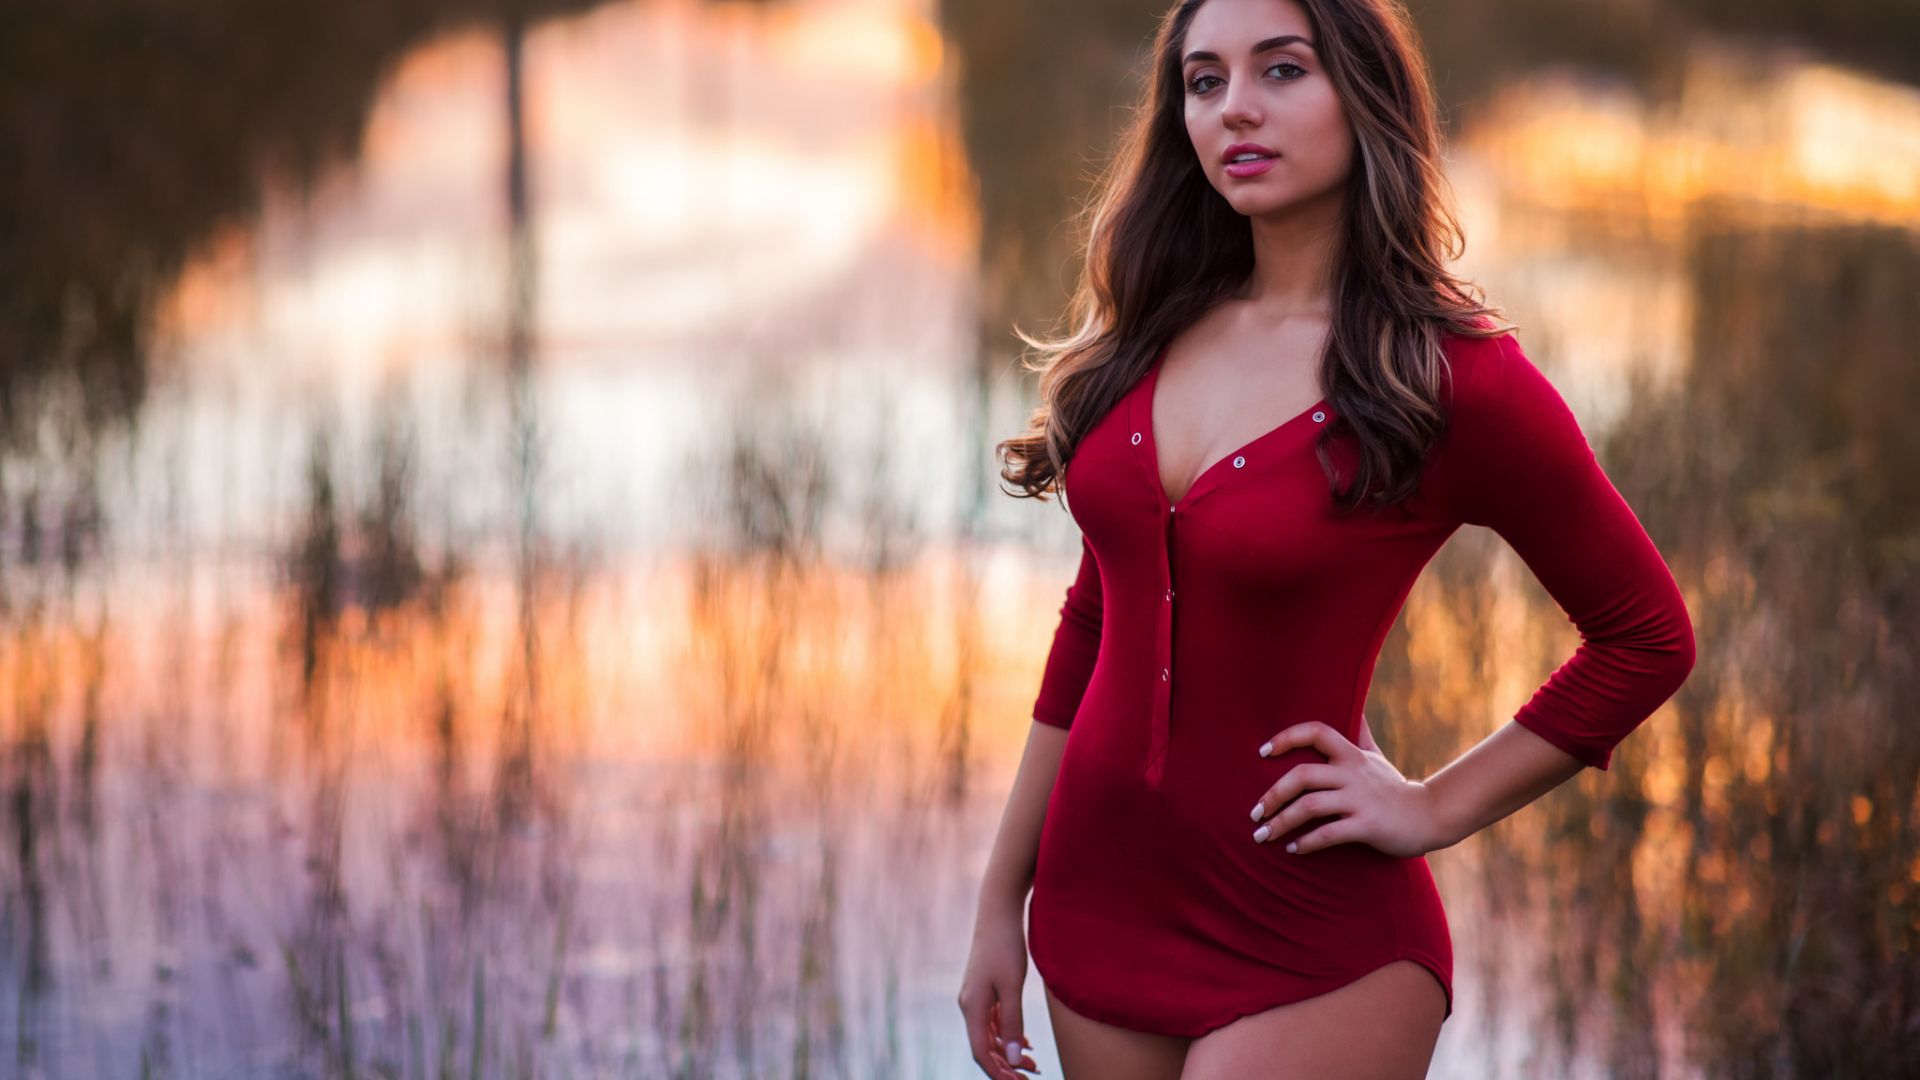 Wallpaper Hot girl model, red outfit, outdoor, lake